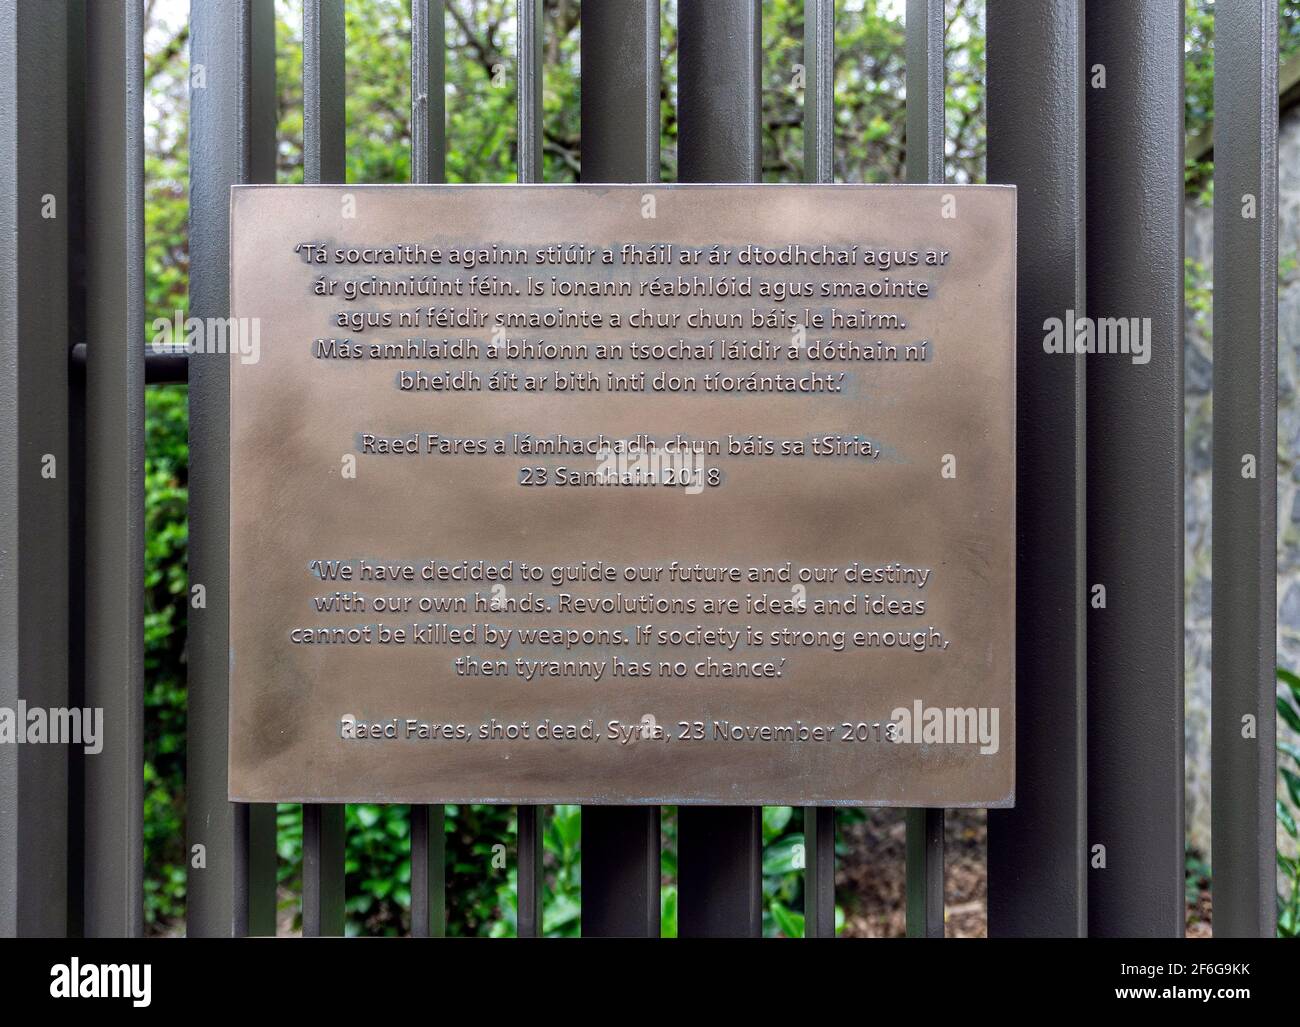 Raed Fares (1972-2018). A plaque commemorating the Syrian journalist in The Memorial to Human Rights Defenders in the Iveagh Gardens in Dublin. Stock Photo